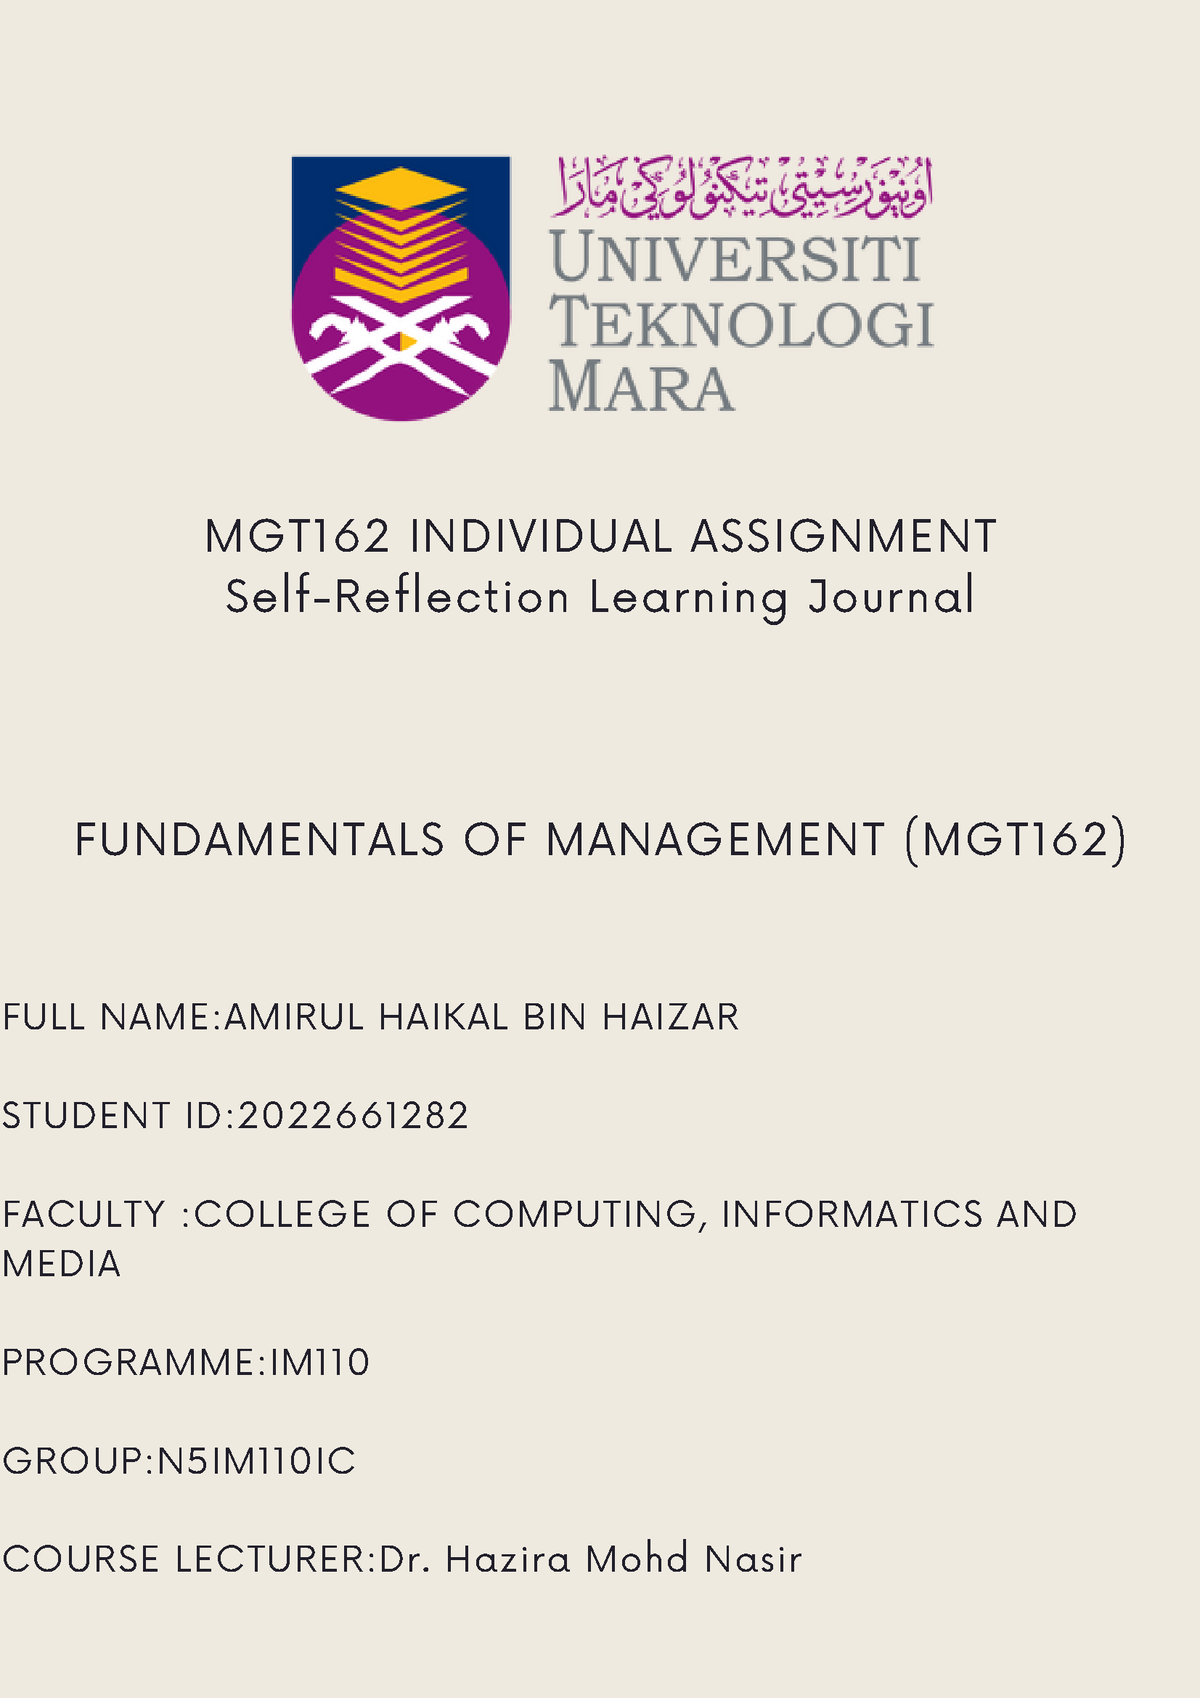 mgt 162 individual assignment self reflection journal